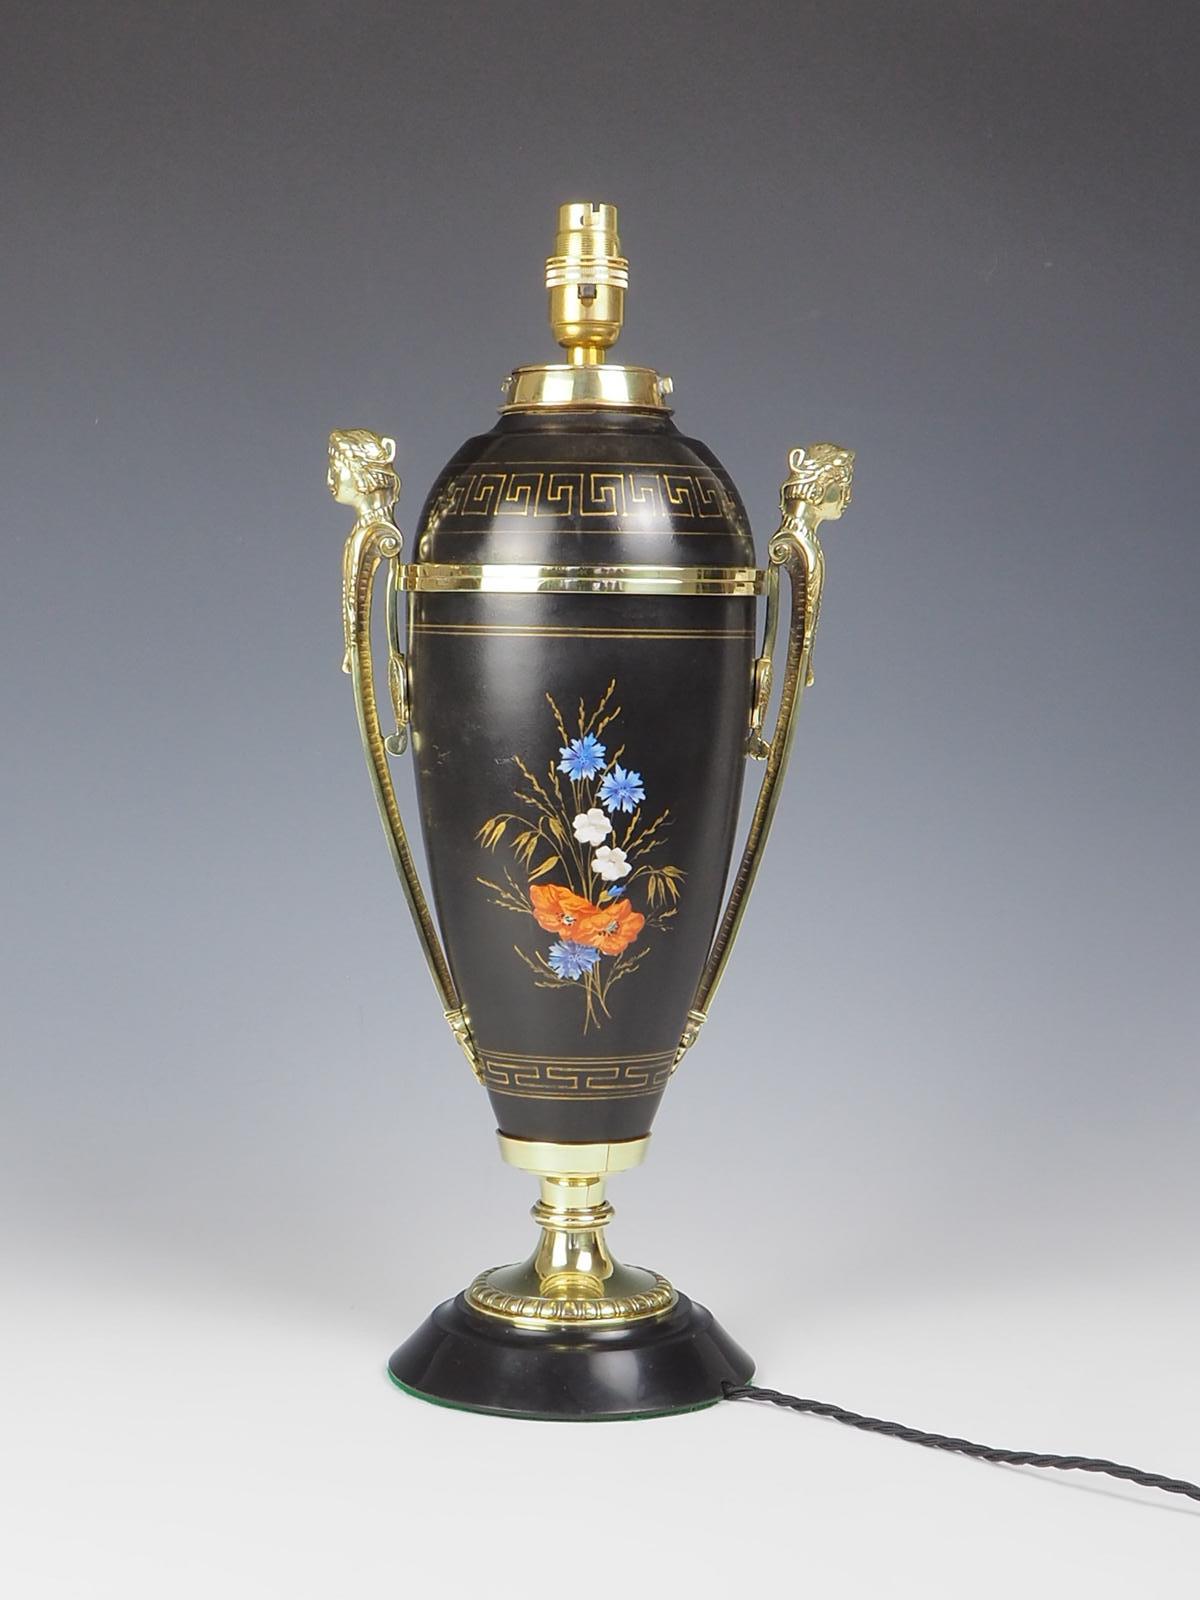 Antique 19th Century Hand Painted Porcelain Table Lamp by A J Hinks and Sons Birmingham.

This exquisite table lamp features a stunning black lacquer design adorned with a hand-painted lady on one side and delicate flowers on the other.

The lamp is